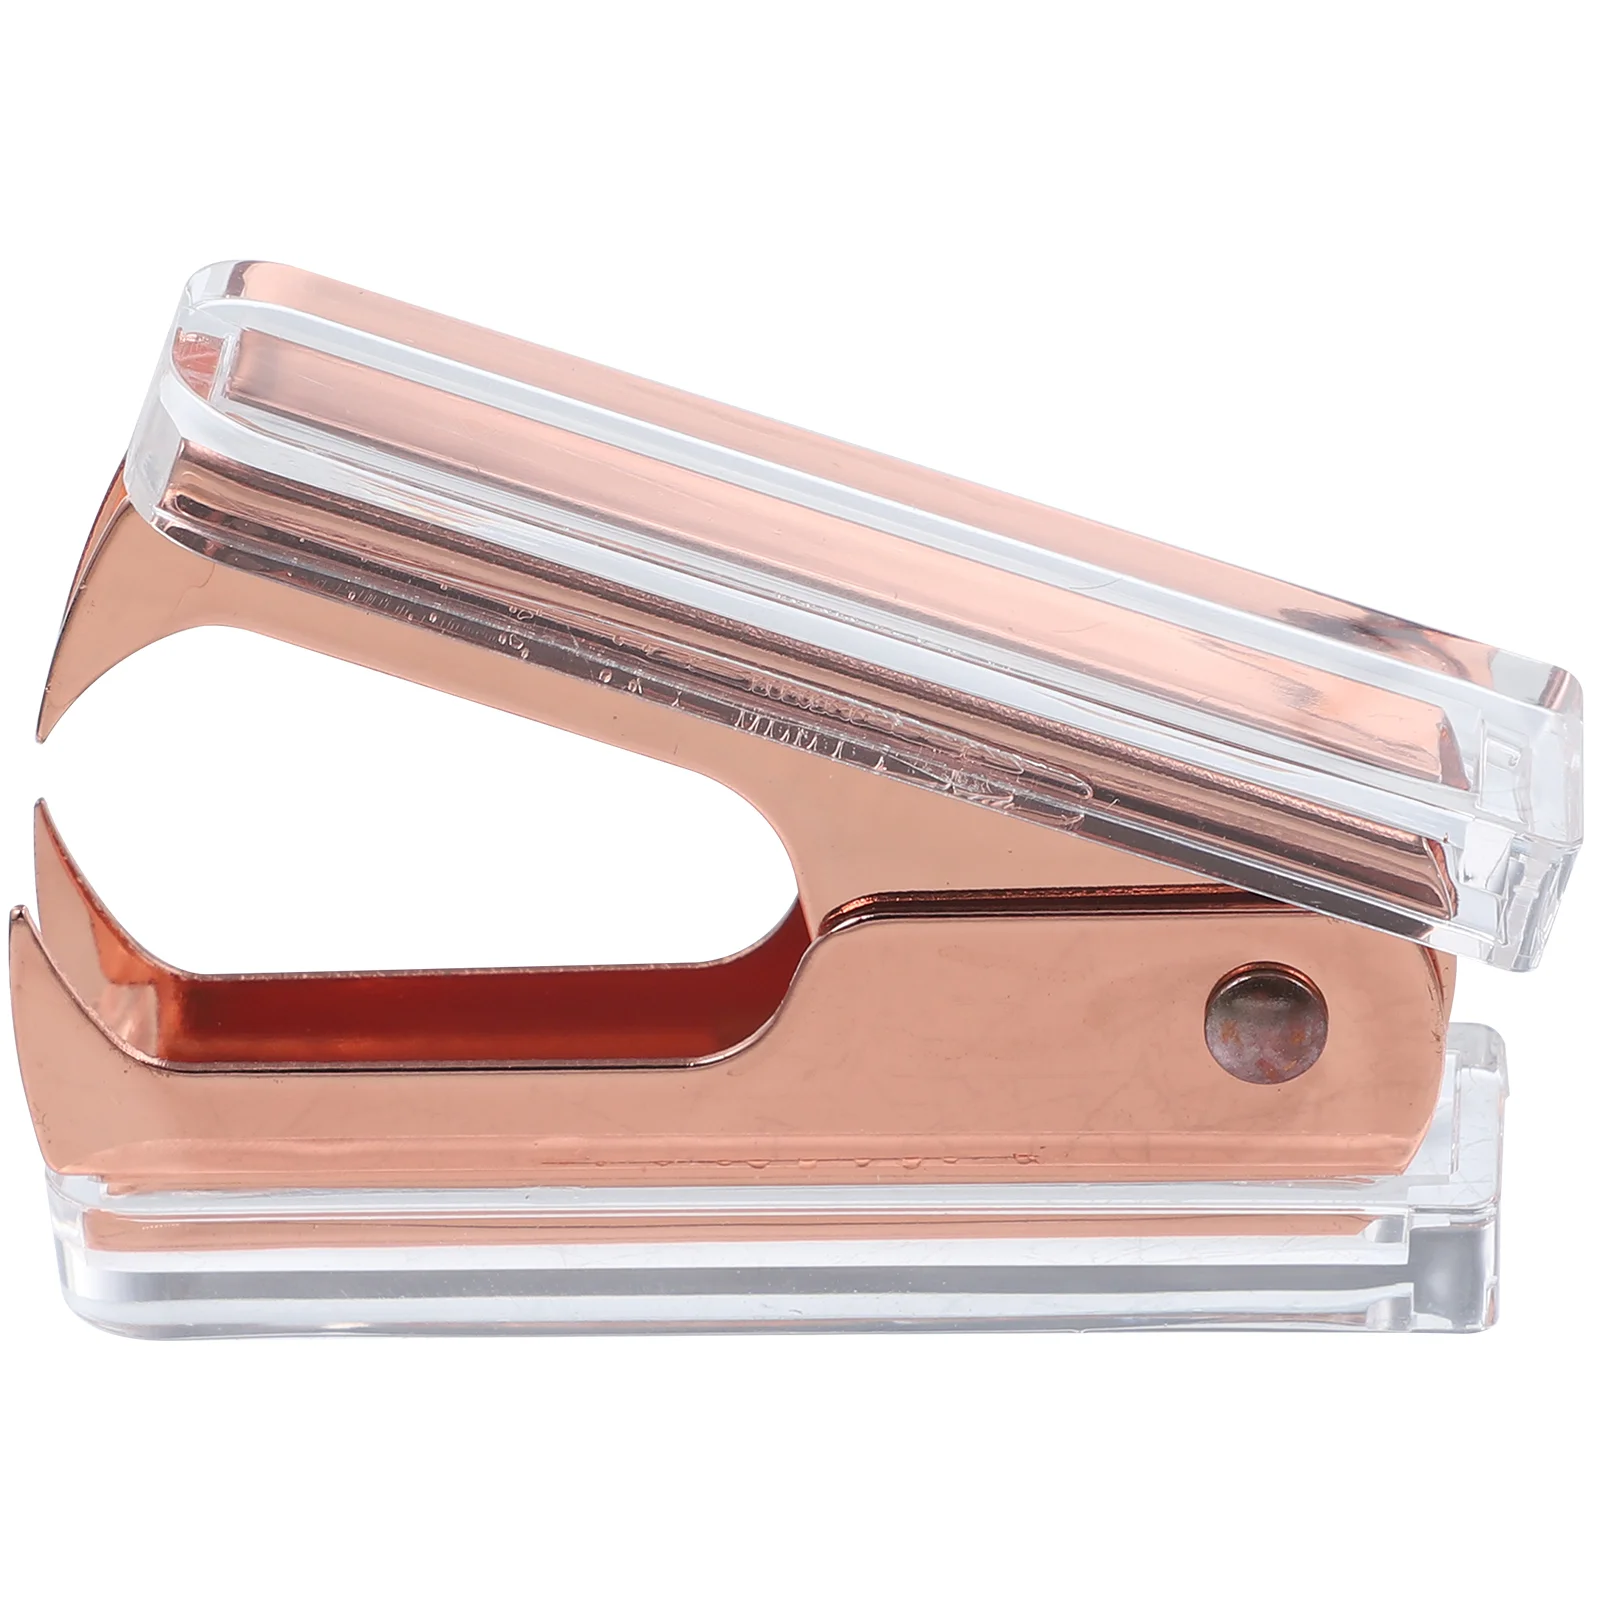 

Clear Stapler Staple Hand Held Puller Marbling Office Removers Removal Tool Metal Tools Pullers Labor-saving Stapler